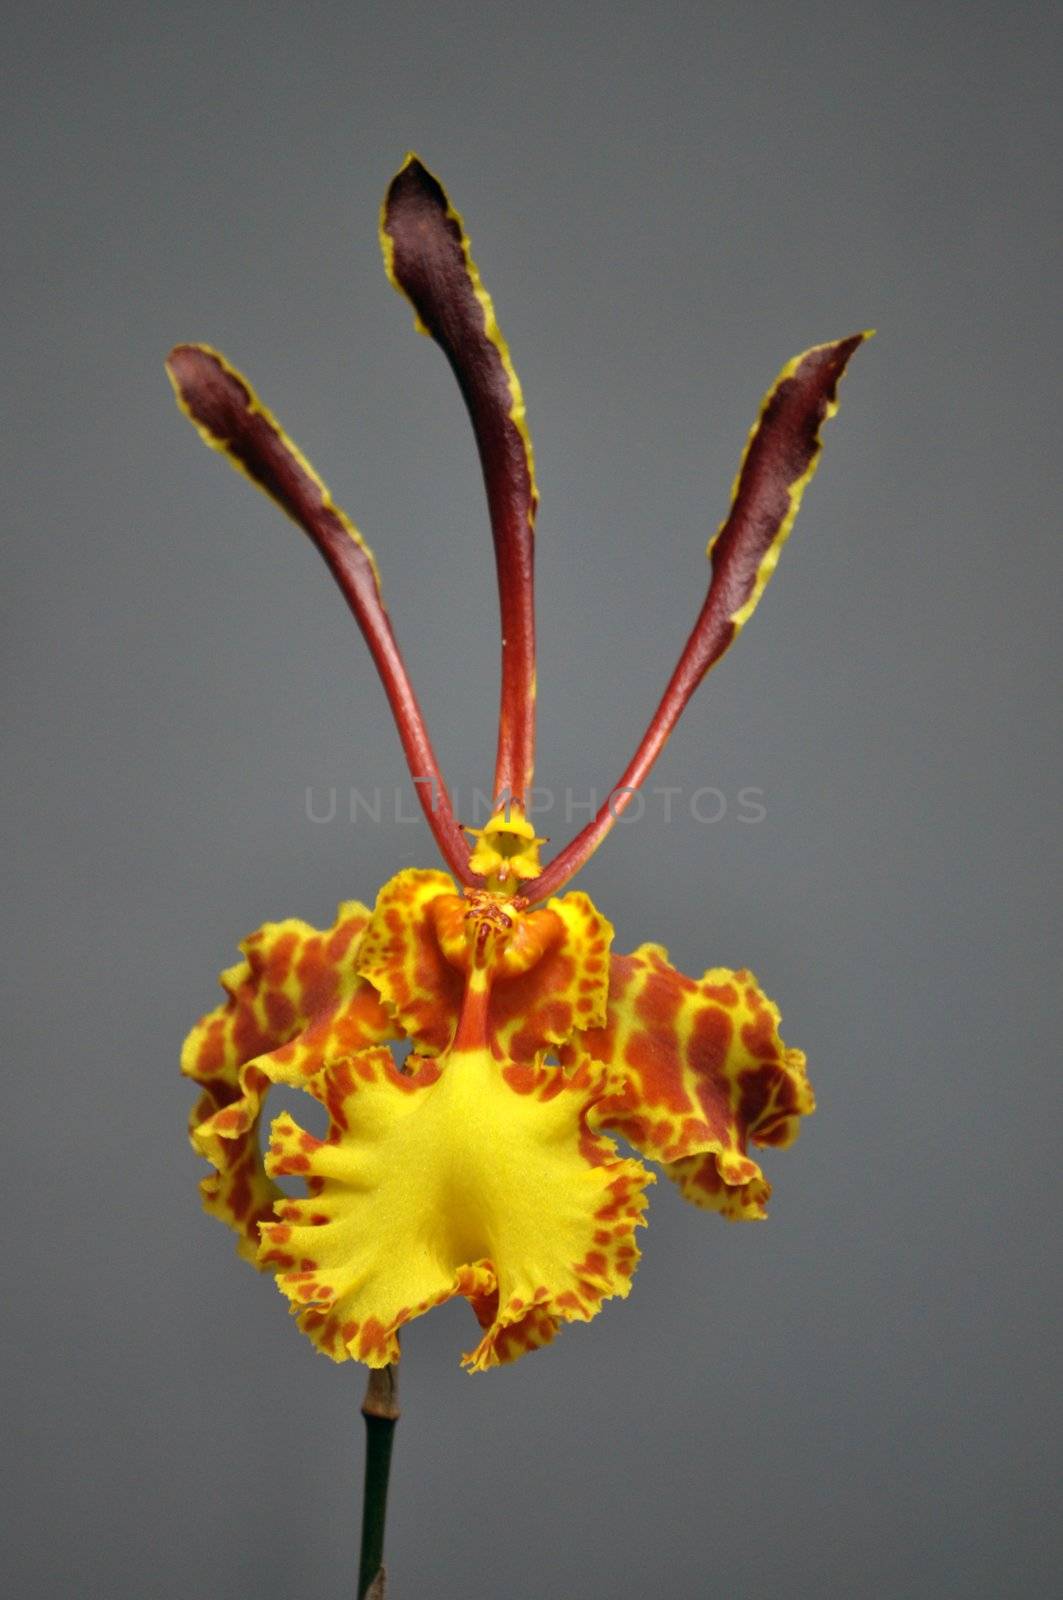 Oncidium orchid by MaZiKab